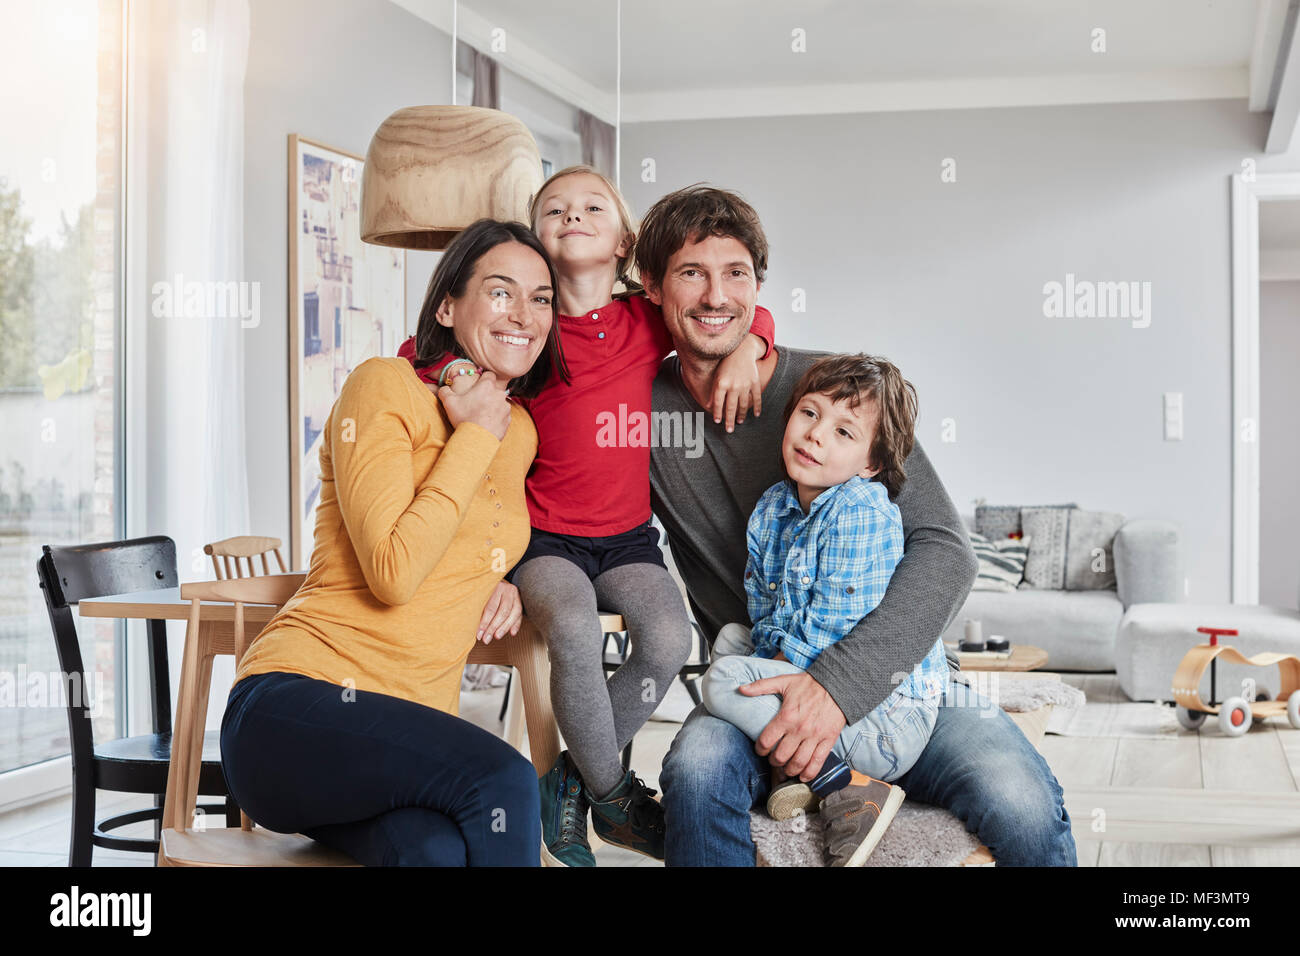 Portrait of happy family with two kids at home Stock Photo